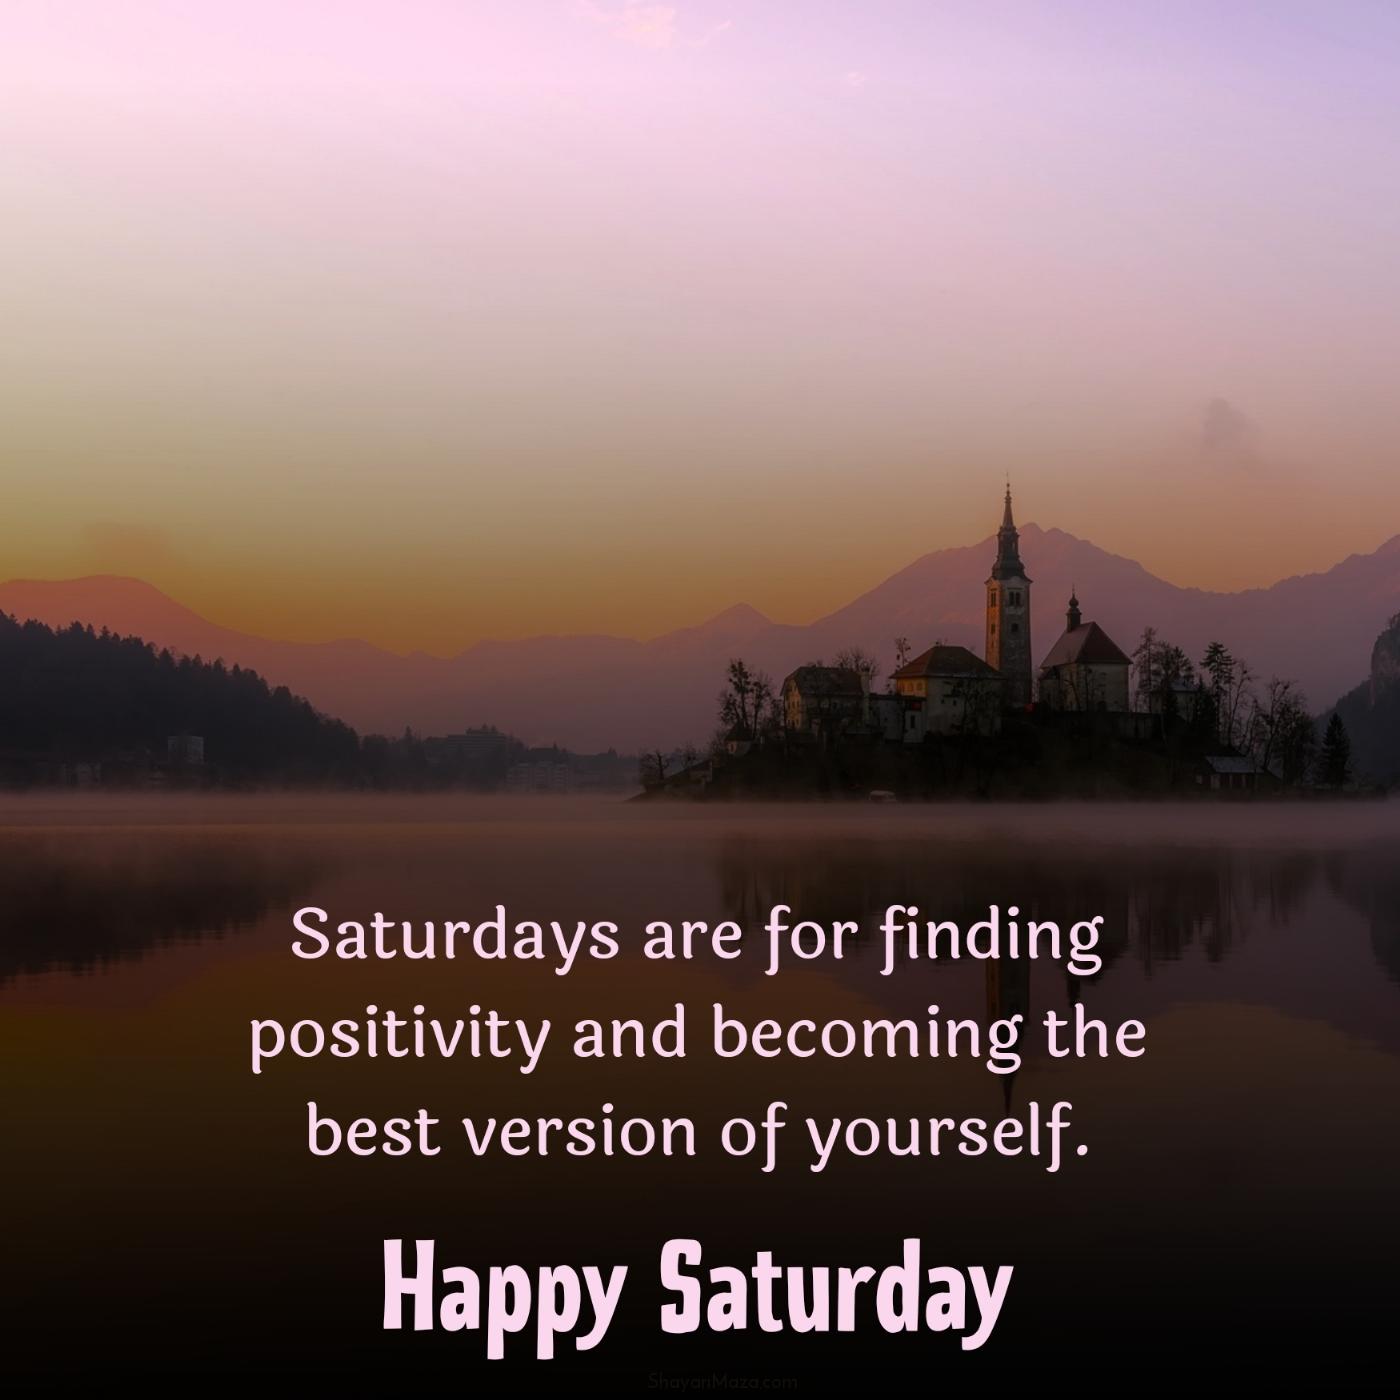 Saturdays are for finding positivity and becoming the best version